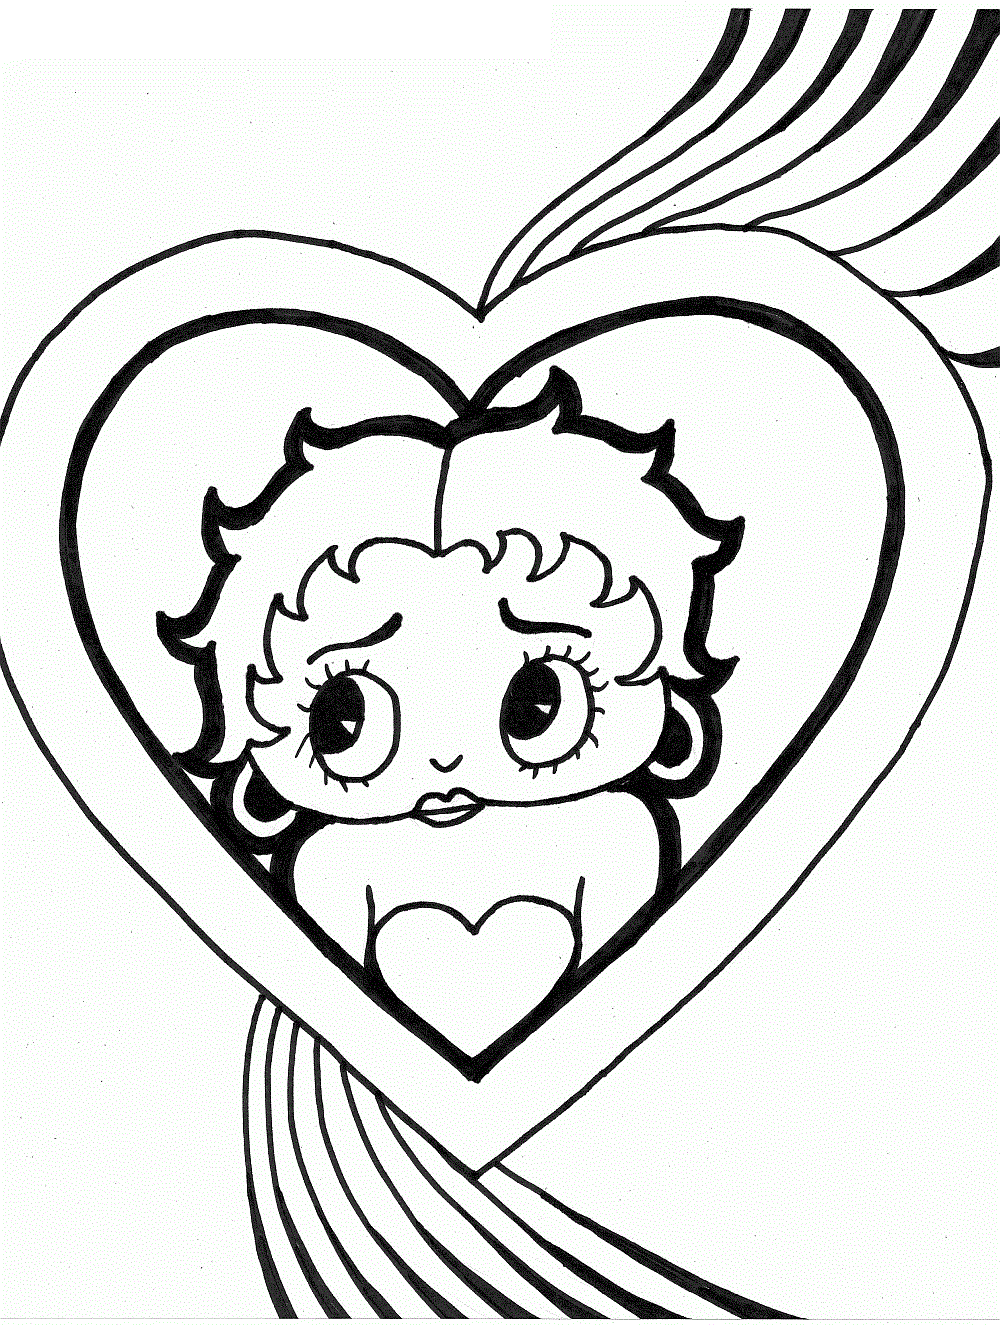 Human Heart Coloring Pages For Kids